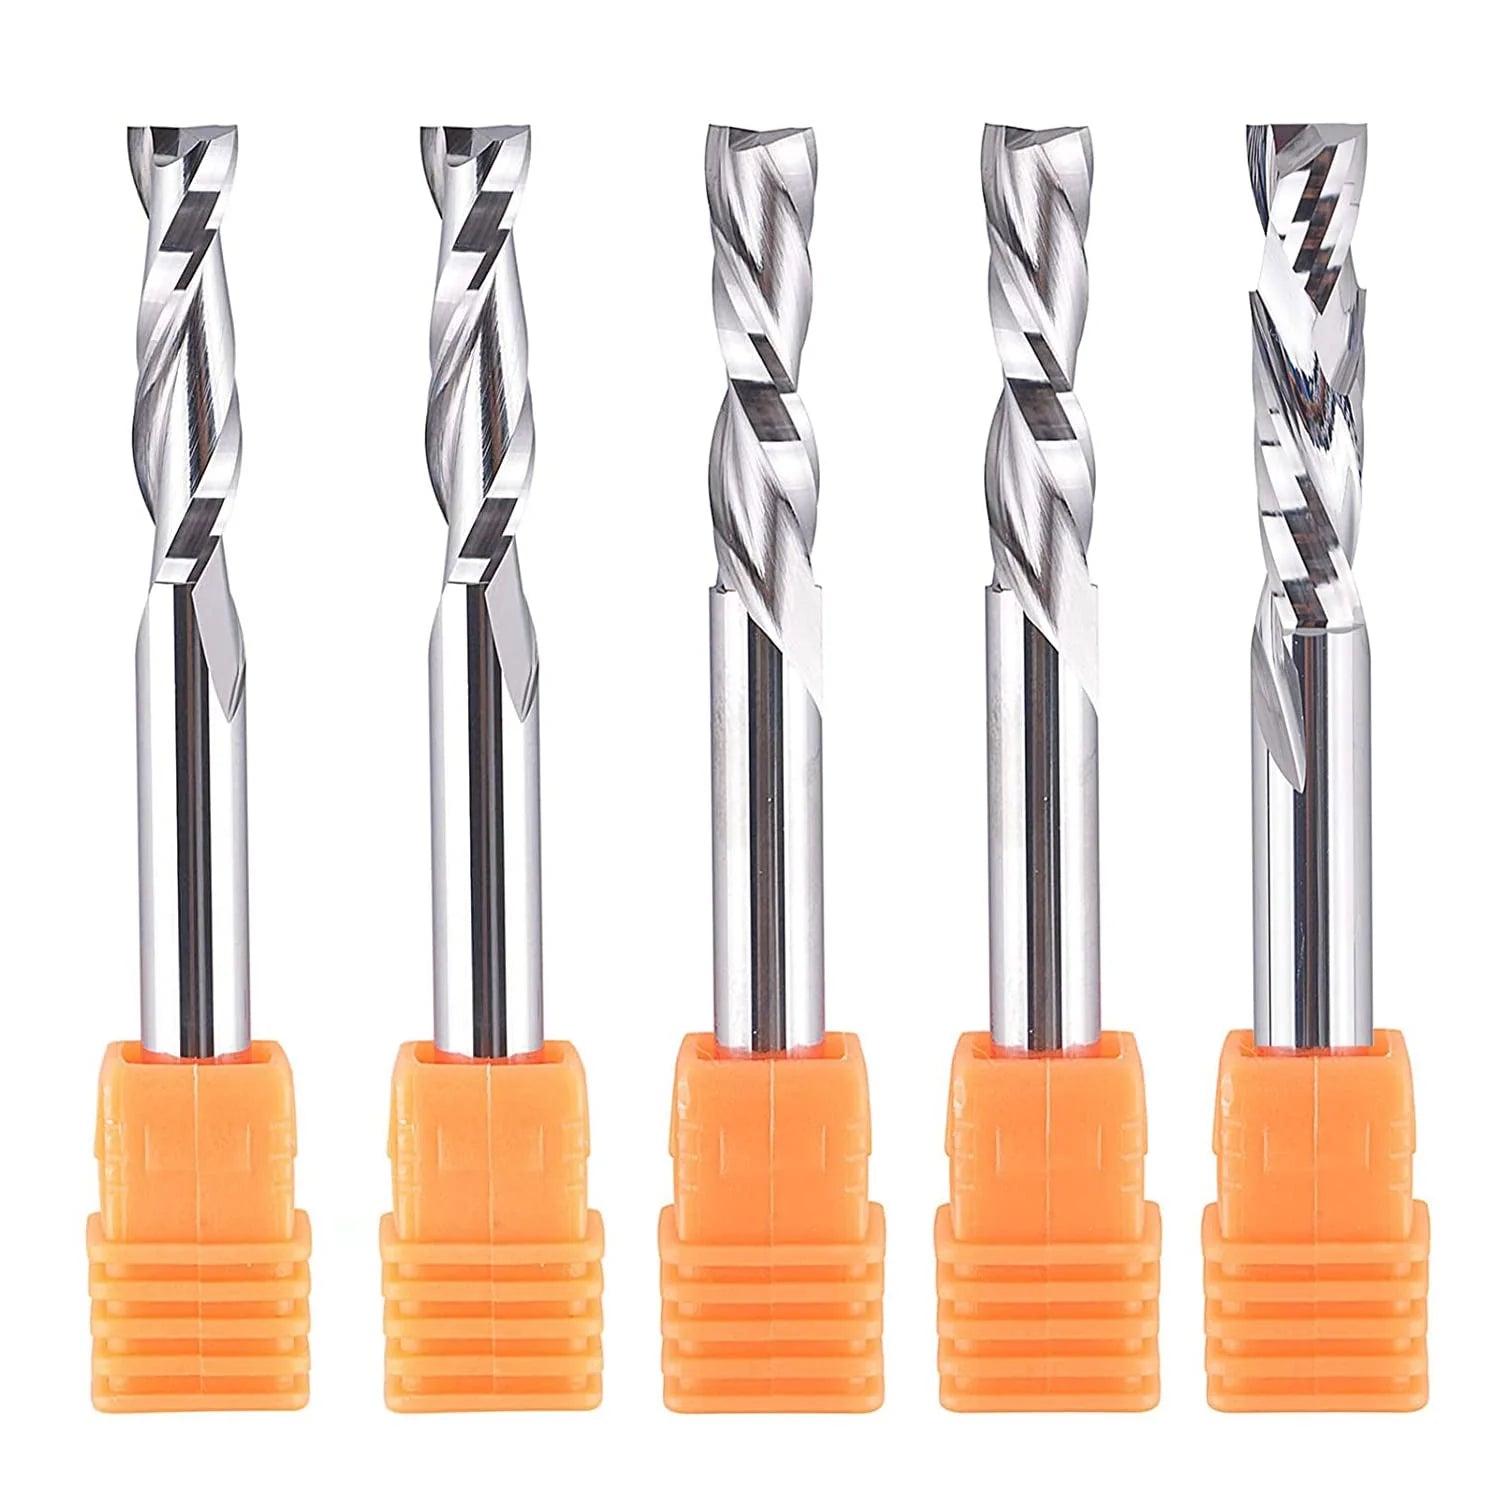 SpeTool WD-4 5Pcs Spiral Router Bits Set 1/4" Shank 1" Cutting Length for Woodworking